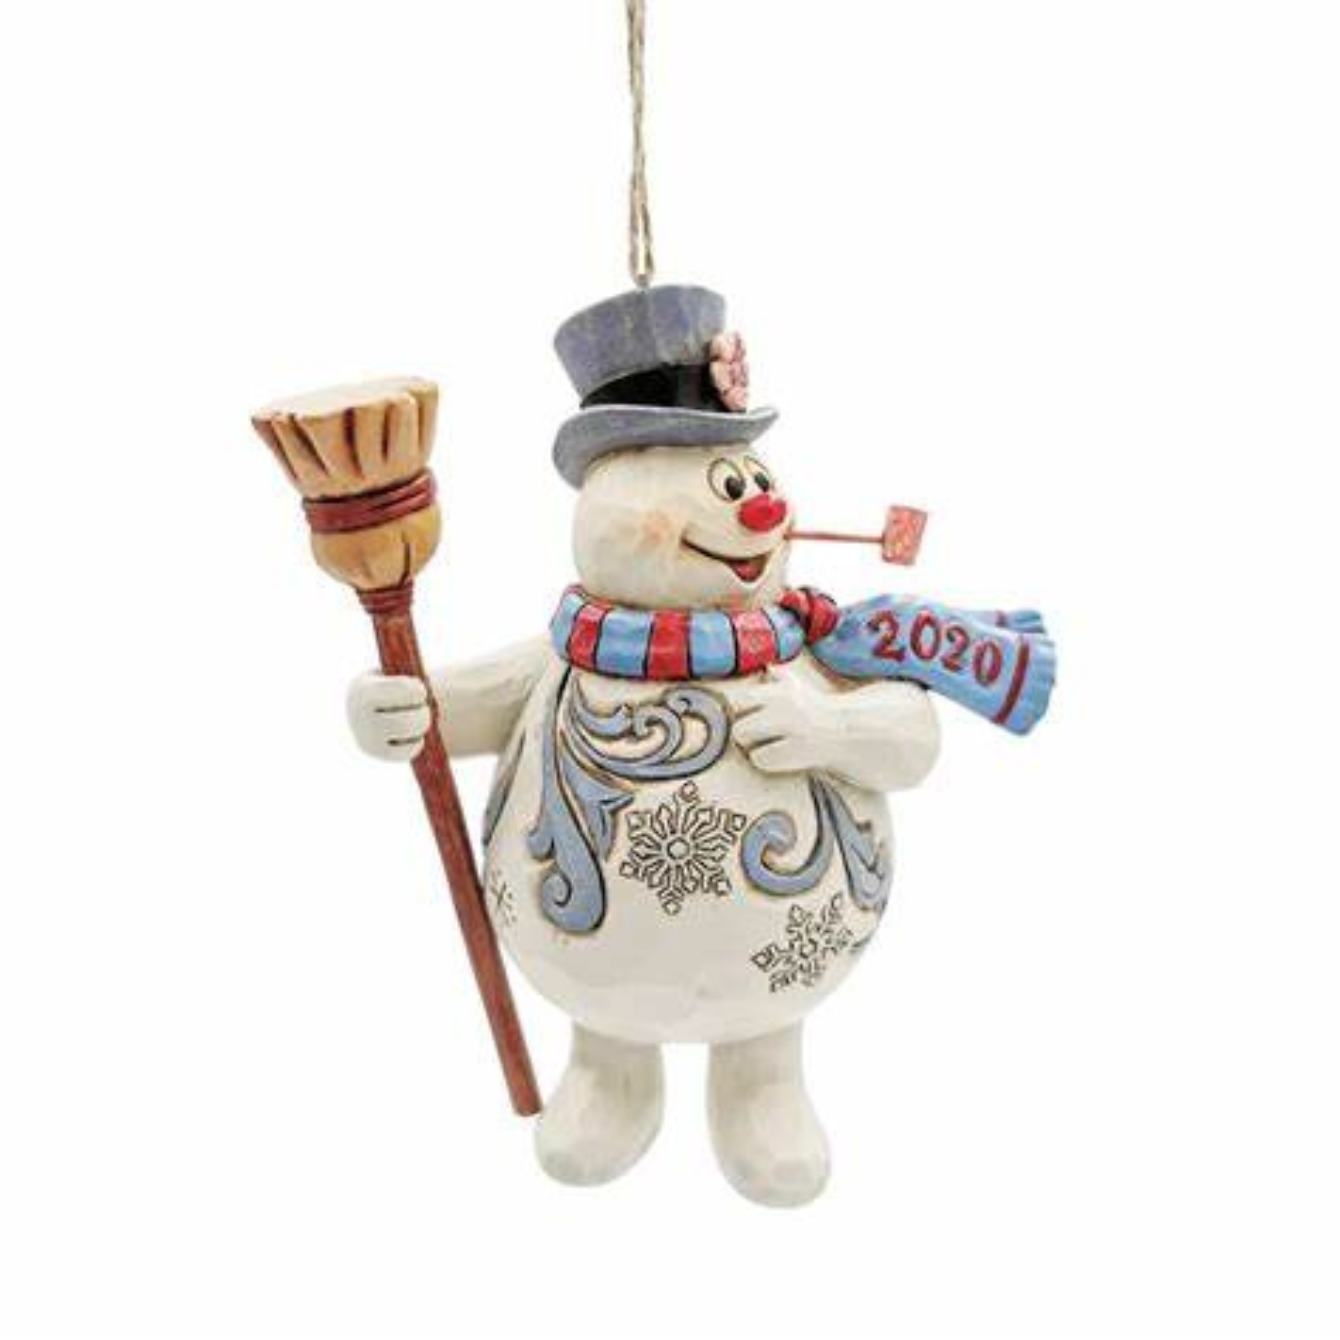 Frosty With Broom Date Ornament